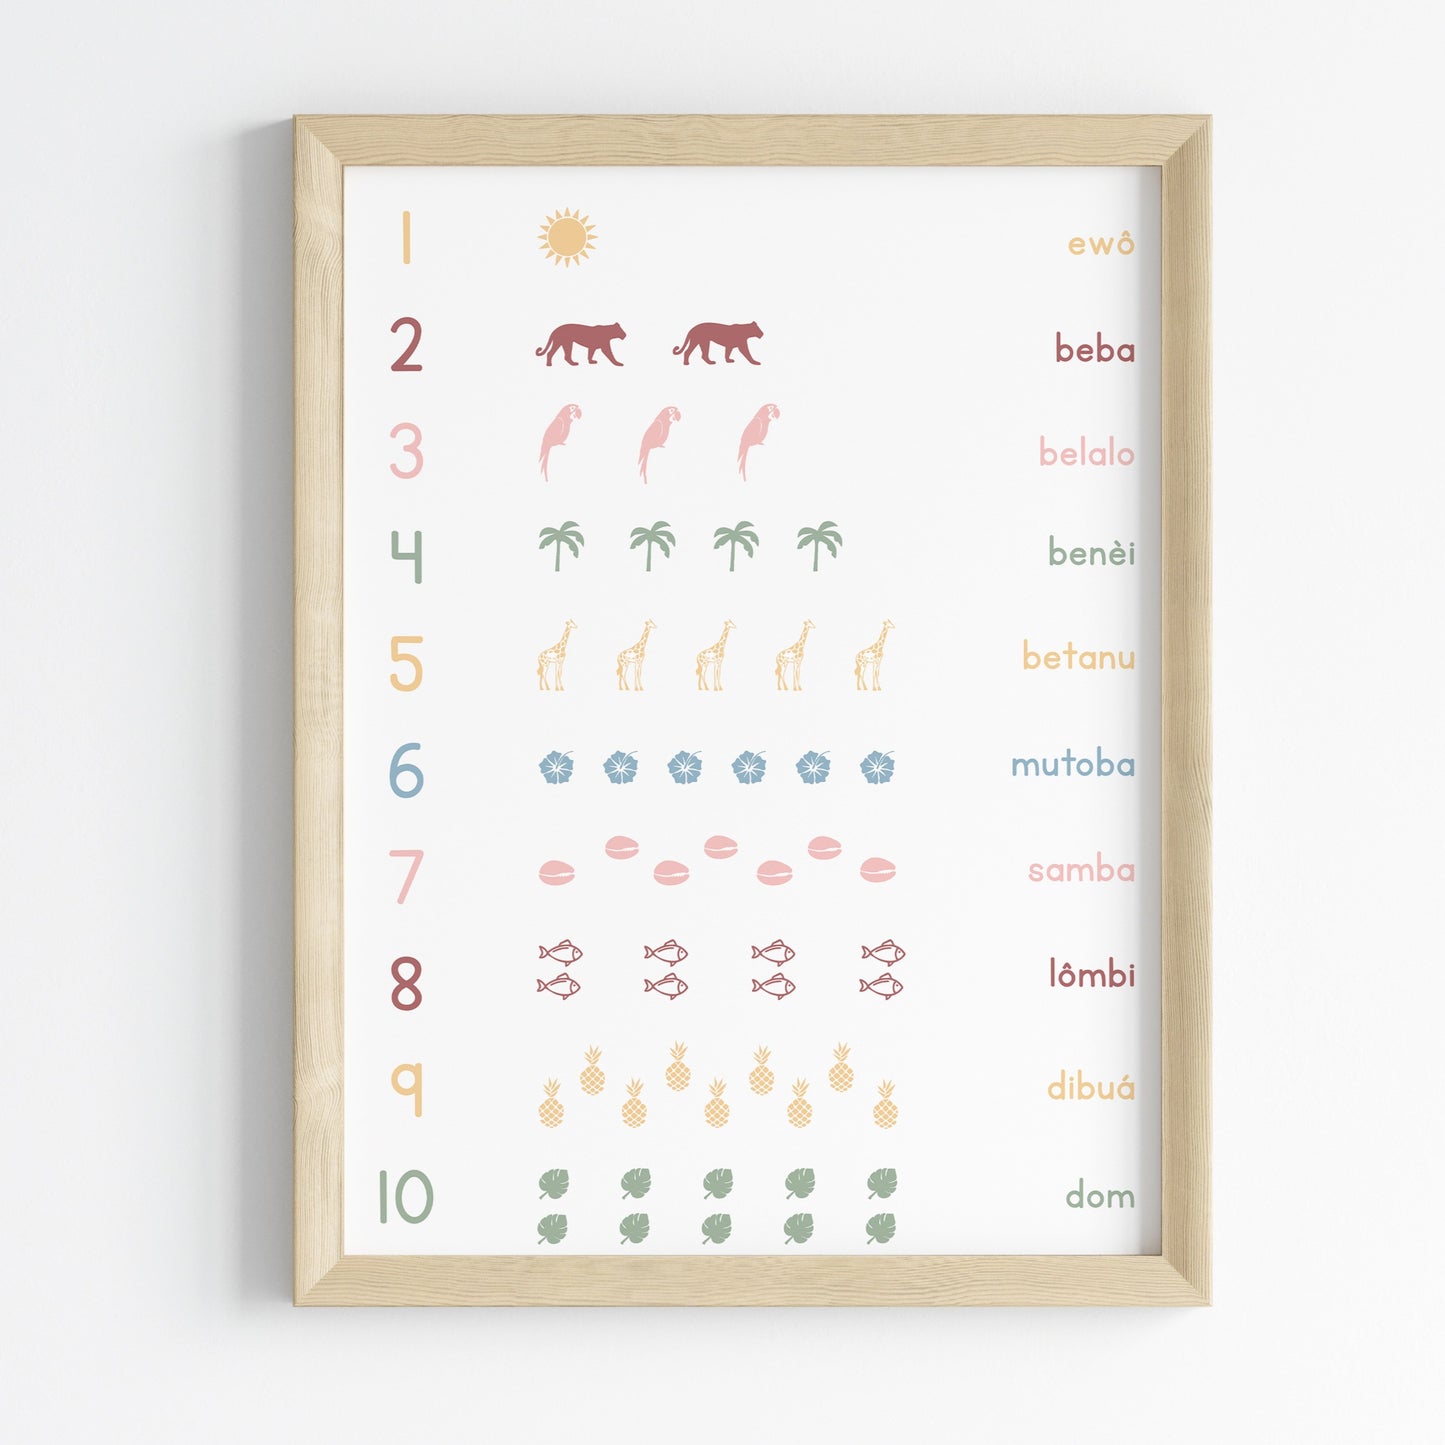 Counting in Kiswahili - Poster 30x40 cm - Educational Poster